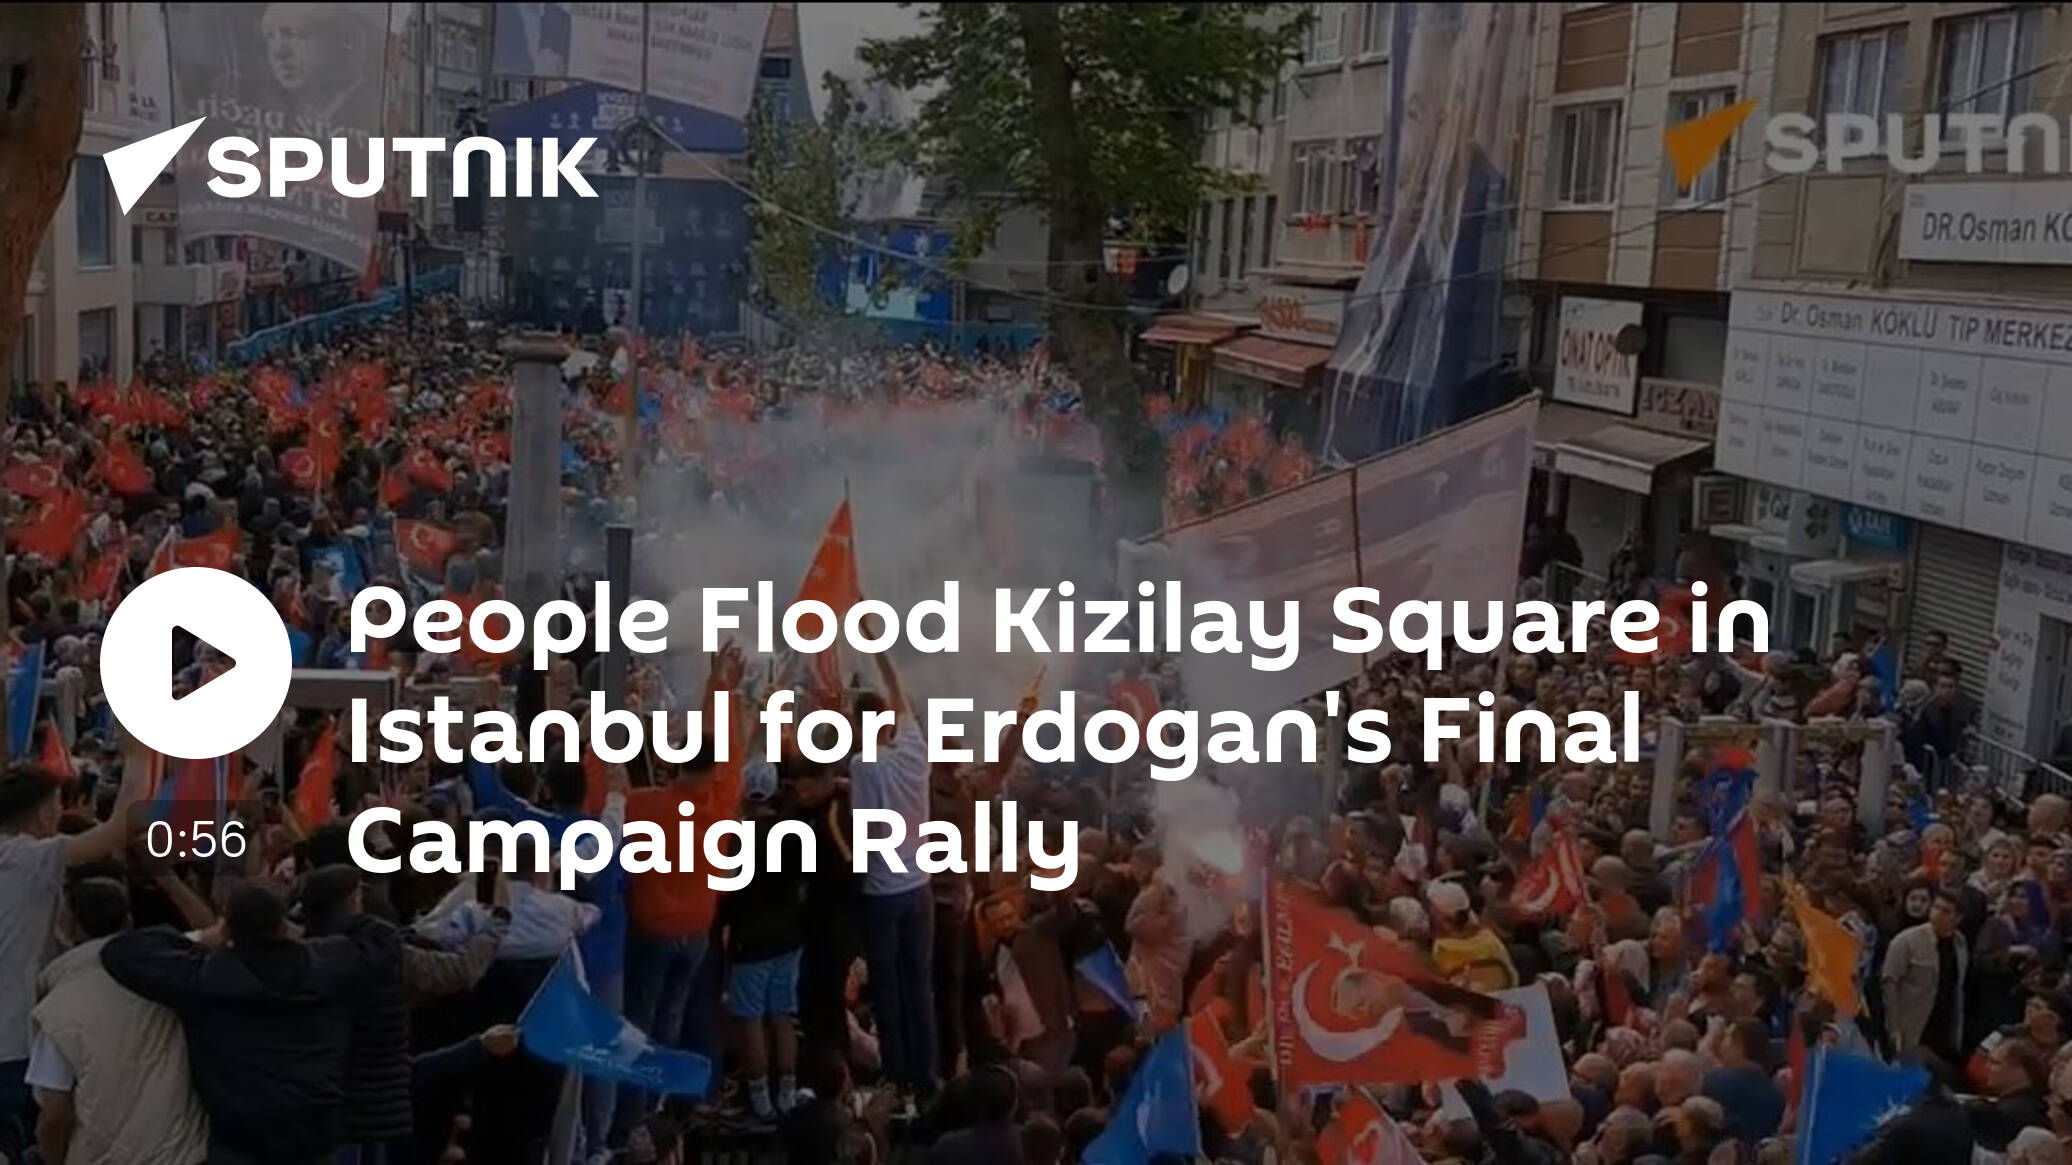 People Flood Kizilay Square in Istanbul for Erdogan's Final Campaign Rally